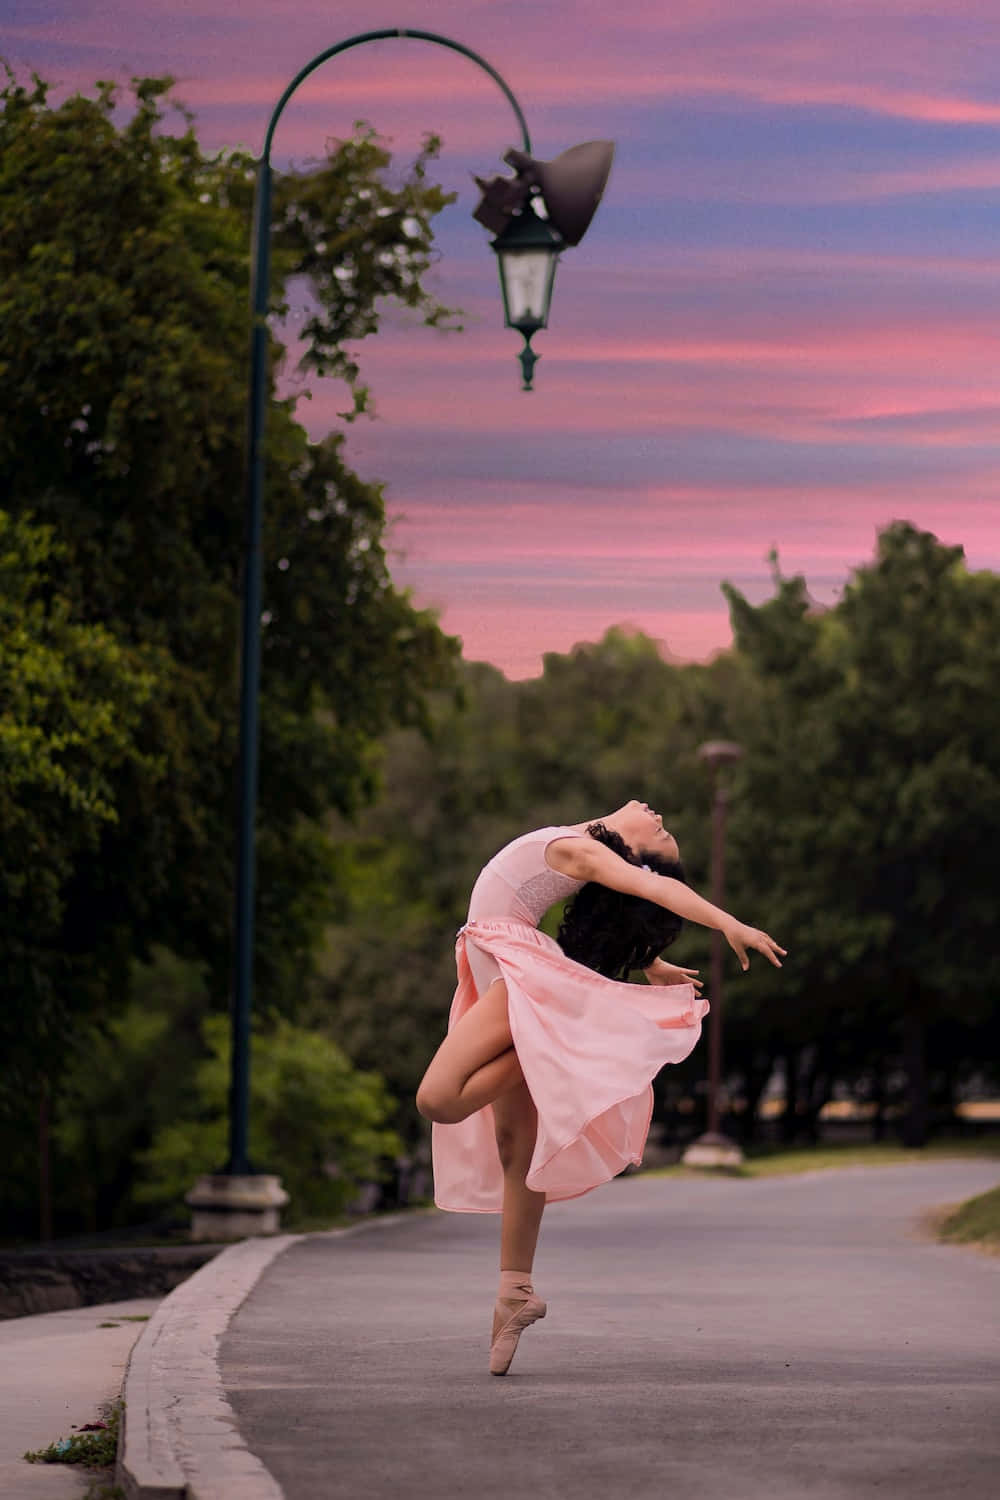 Ballet Dancer And Sunset Sky Picture